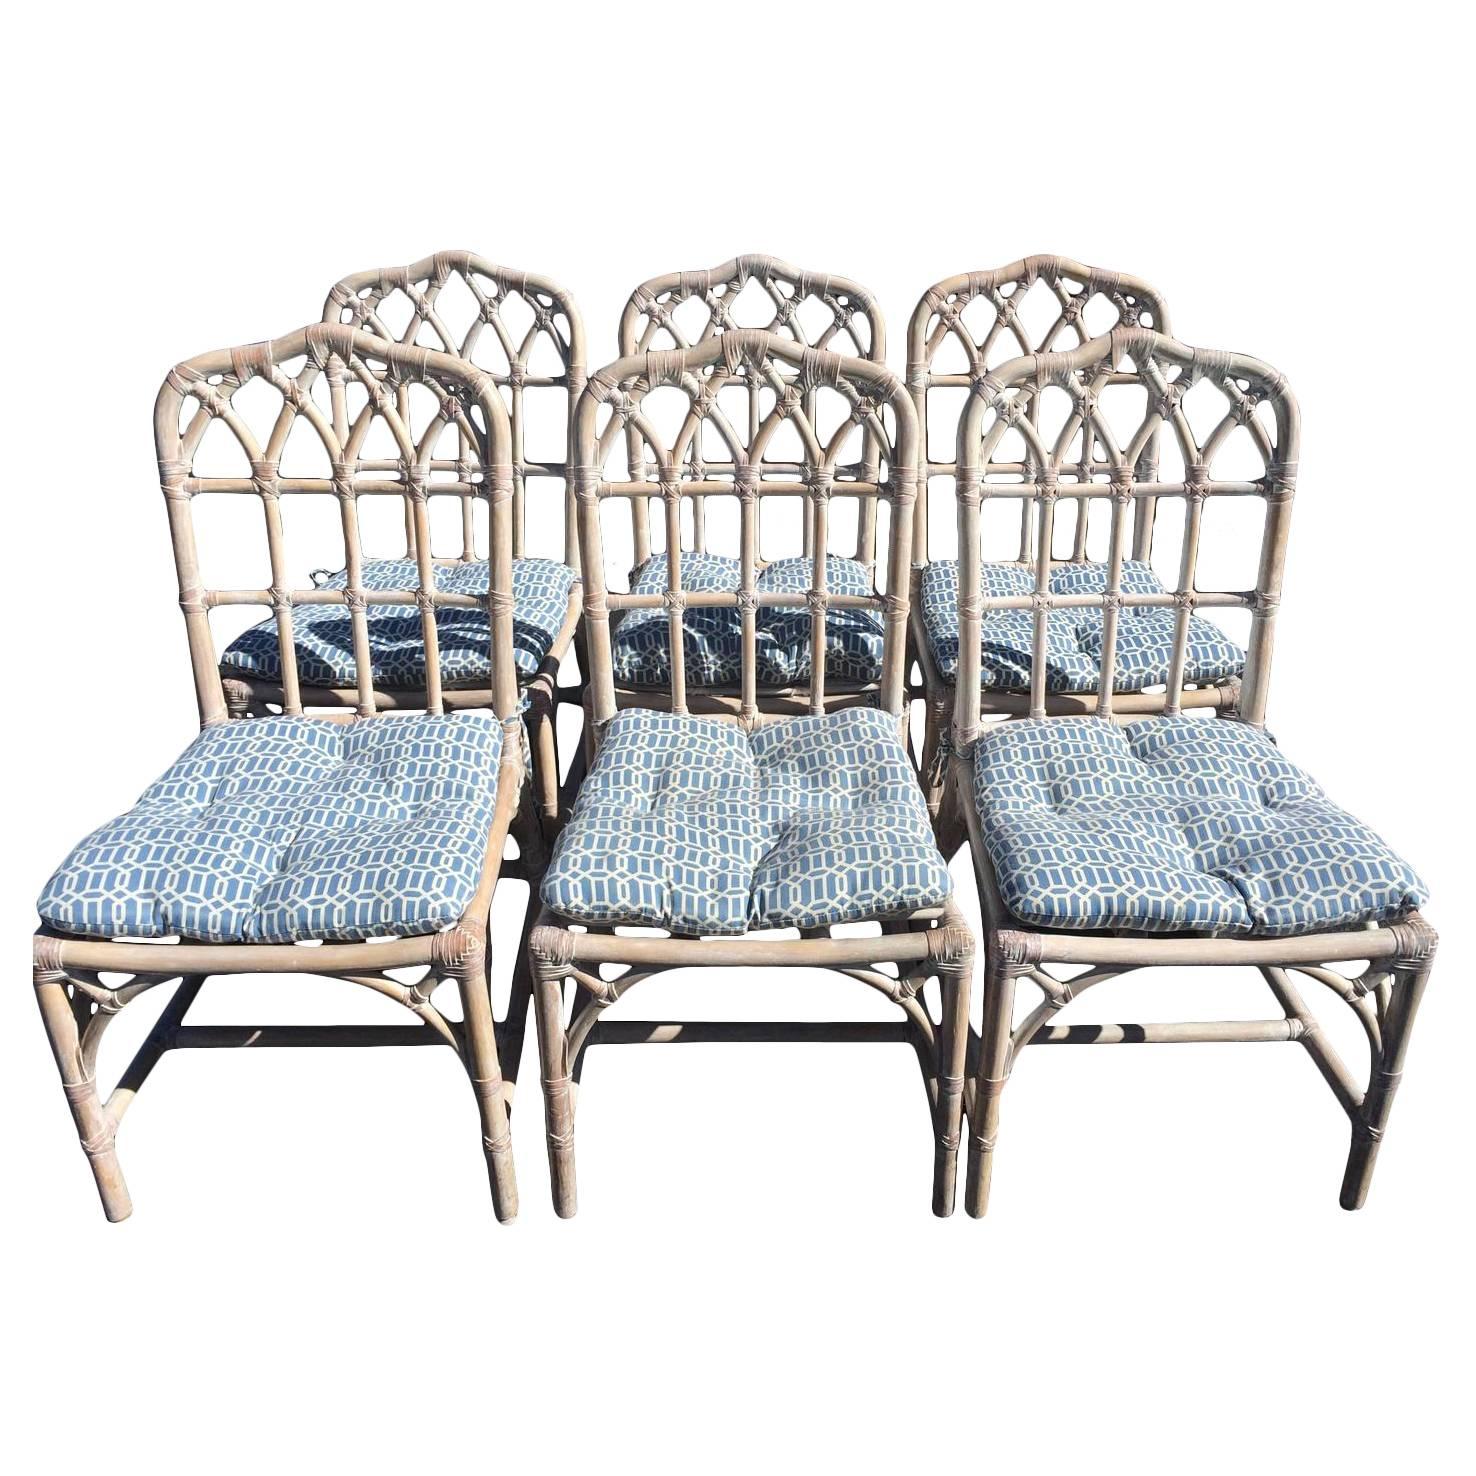 McGuire Bamboo Chinese Chippendale chairs